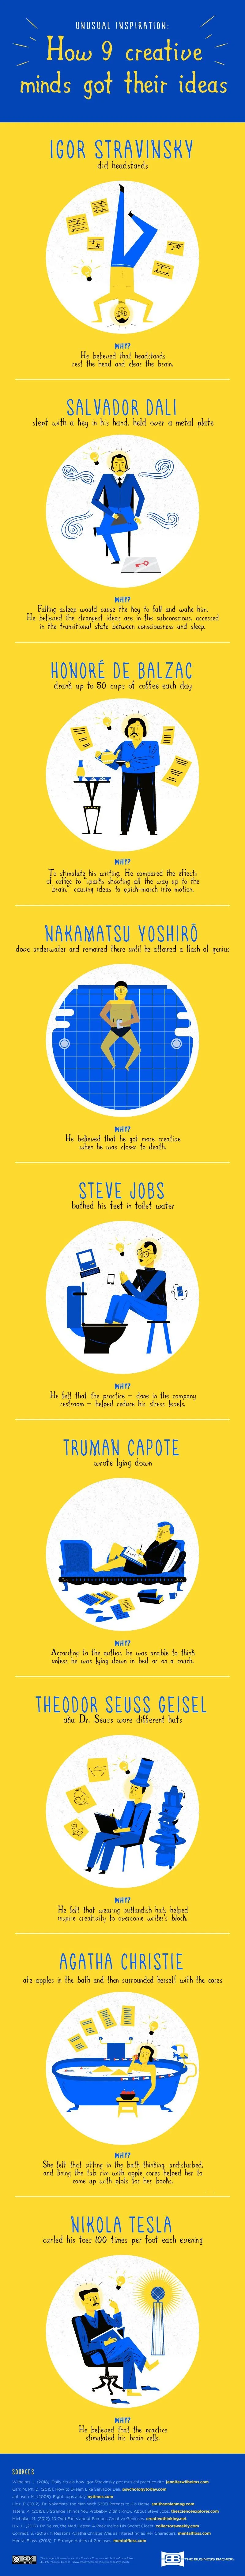 Unusual Inspiration: Here's how some successful and creative people got their ideas